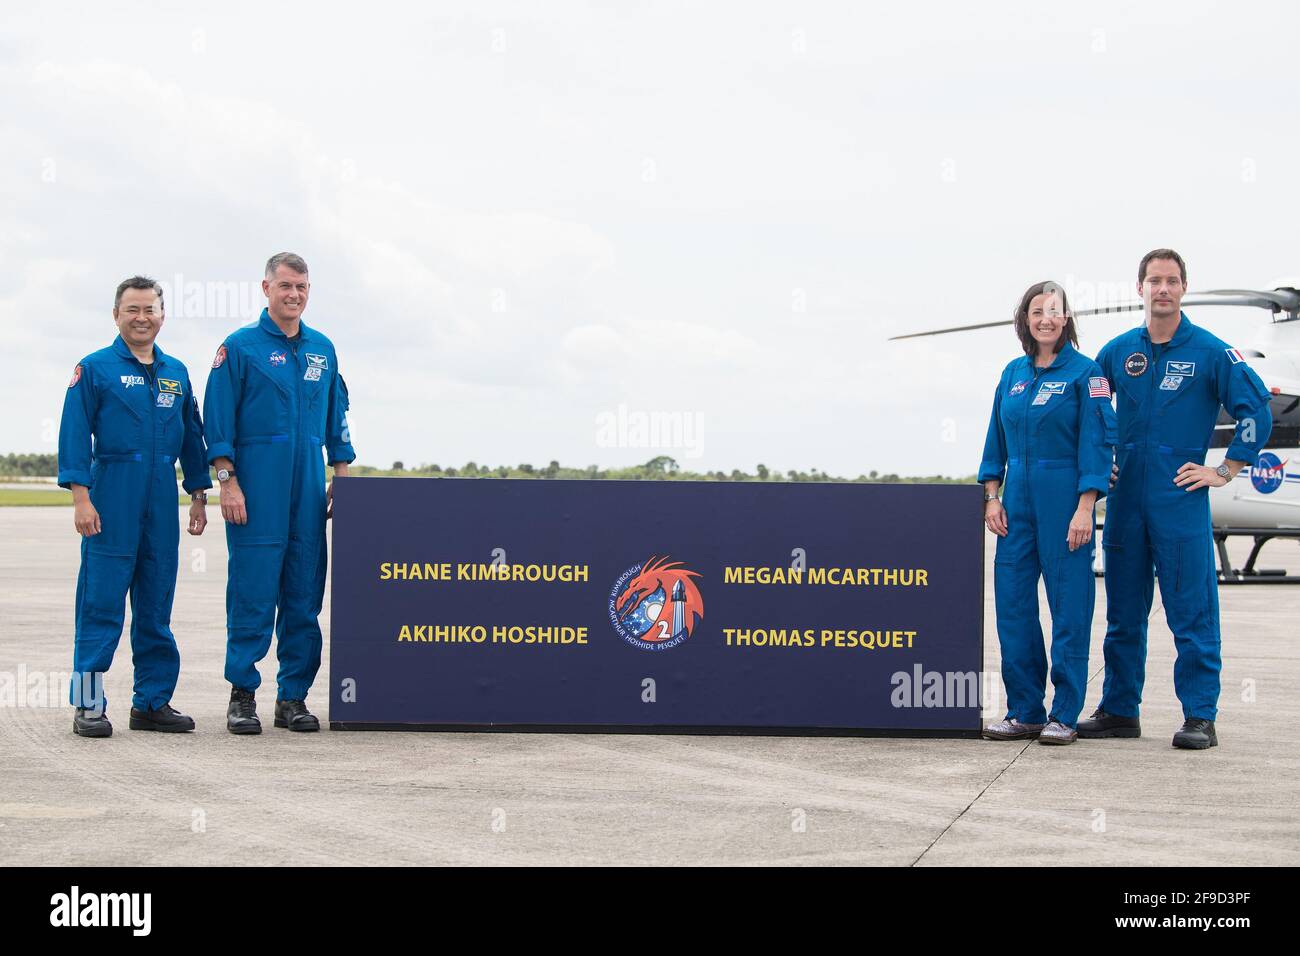 From left to right, Japan Aerospace Exploration Agency (JAXA) astronaut Akihiko Hoshide, NASA astronauts Shane Kimbrough and Megan McArthur, and ESA (European Space Agency) astronaut Thomas Pesquet pose for a photo after arriving at the Launch and Landing Facility at NASA's Kennedy Space Center ahead of SpaceX's Crew-2 mission, on Friday, April 16, 2021, in Florida. NASA's SpaceX Crew-2 mission is the second operational mission of the SpaceX Crew Dragon spacecraft and Falcon 9 rocket to the International Space Station as part of the agency's Commercial Crew Program. Kimbrough, McArthur, Pesque Stock Photo